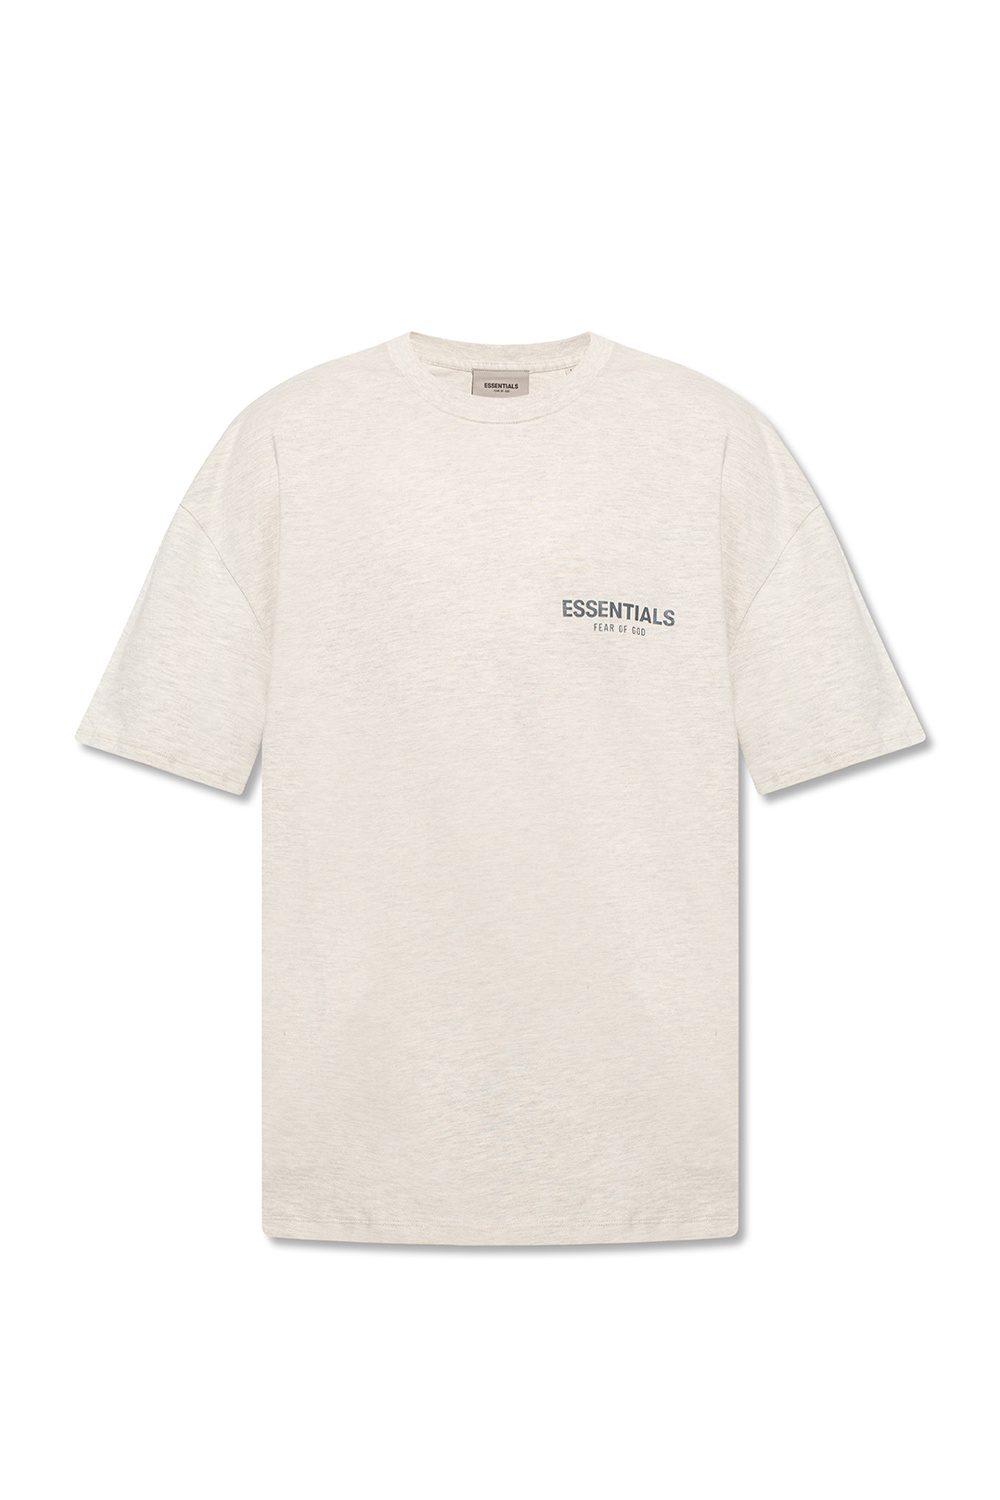 Fear Of God Essentials T-shirt with logo | Men's Clothing | Vitkac